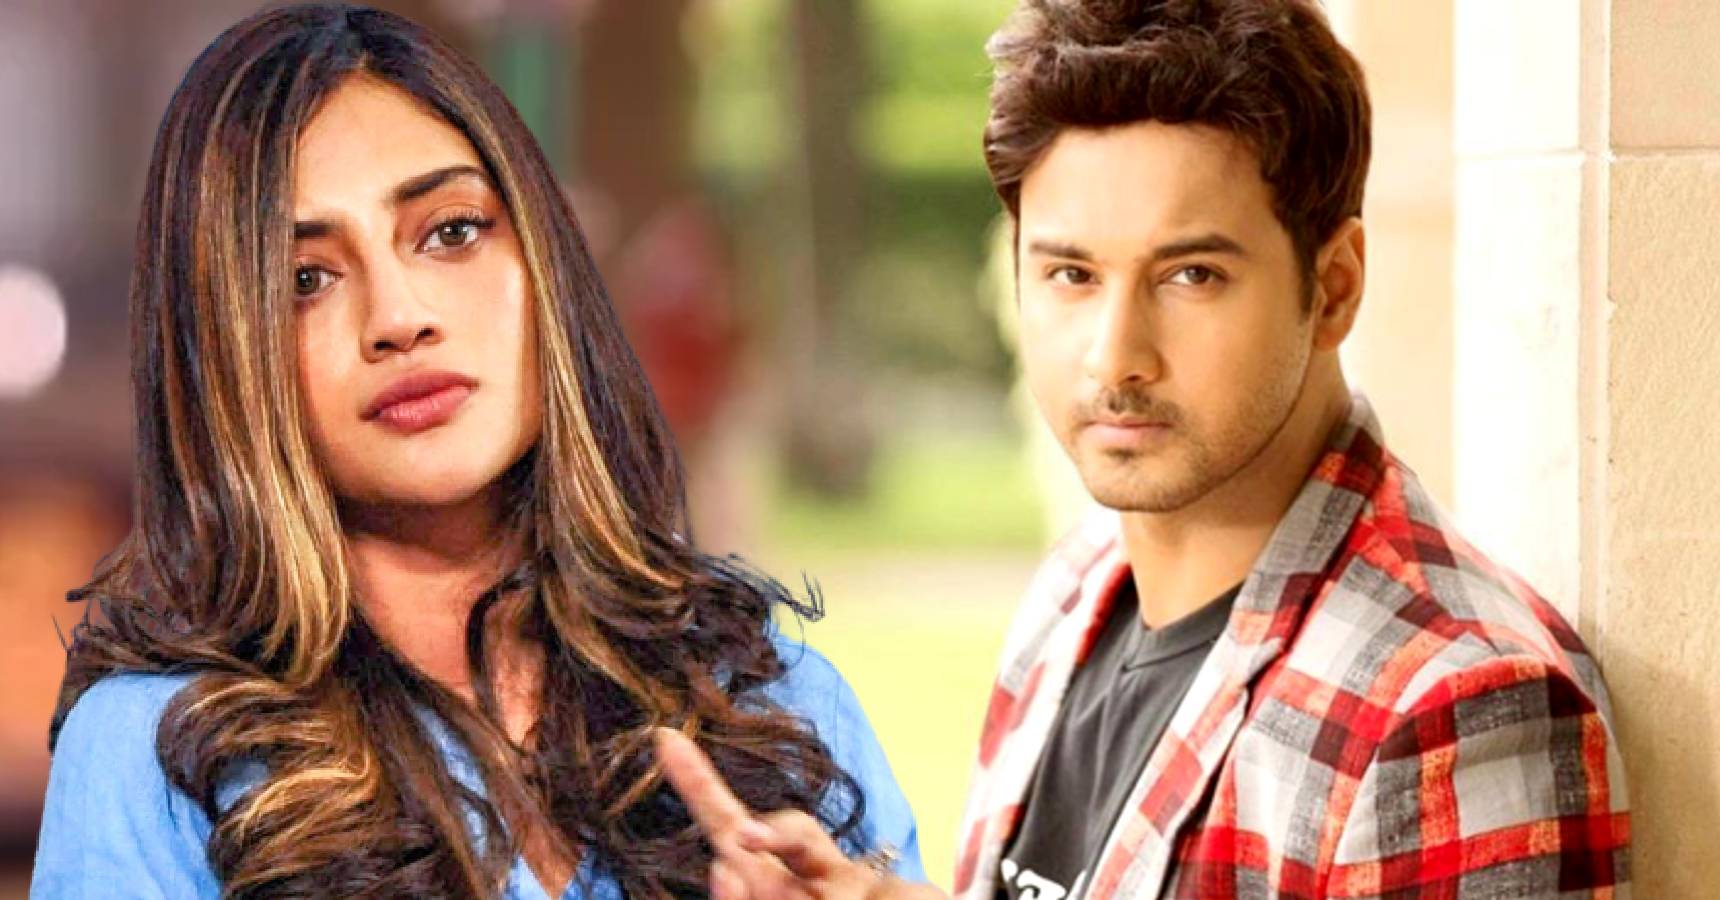 A fan asked Tollywood actor Yash Dasgupta if he is a virgin or not